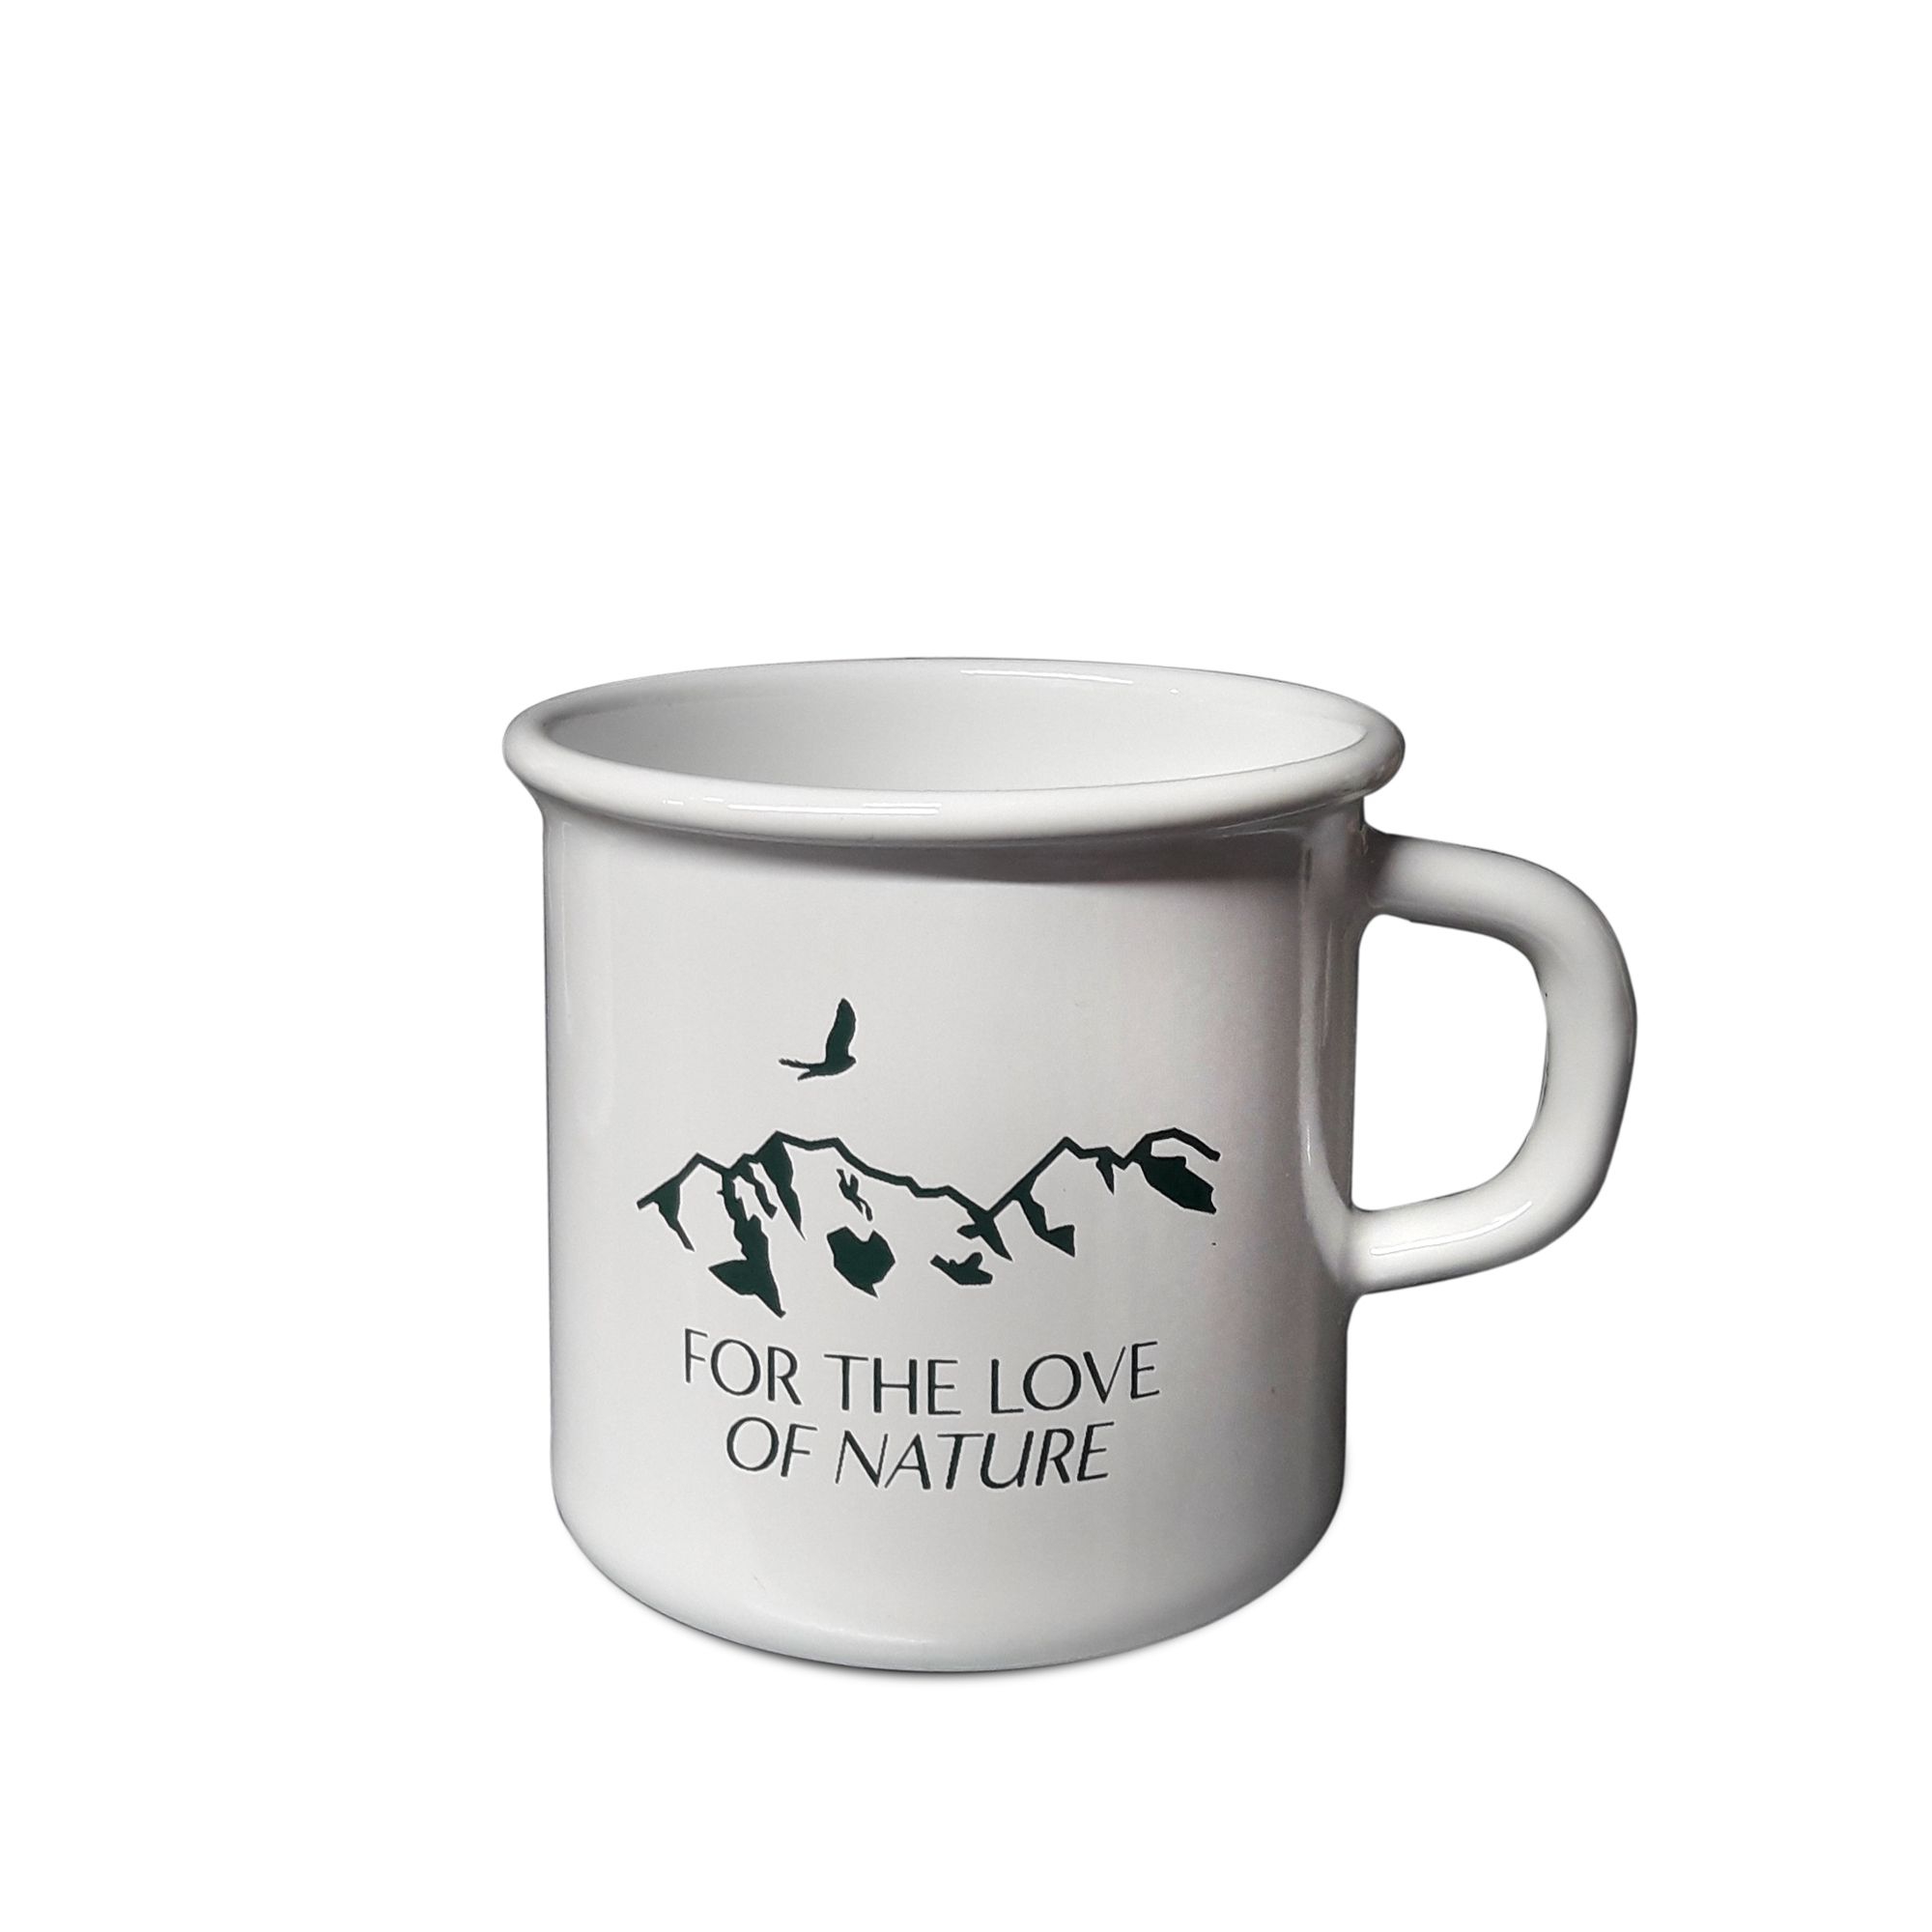 Riess - for the Love of Nature - Topf mit Bördel/Trinkbecher